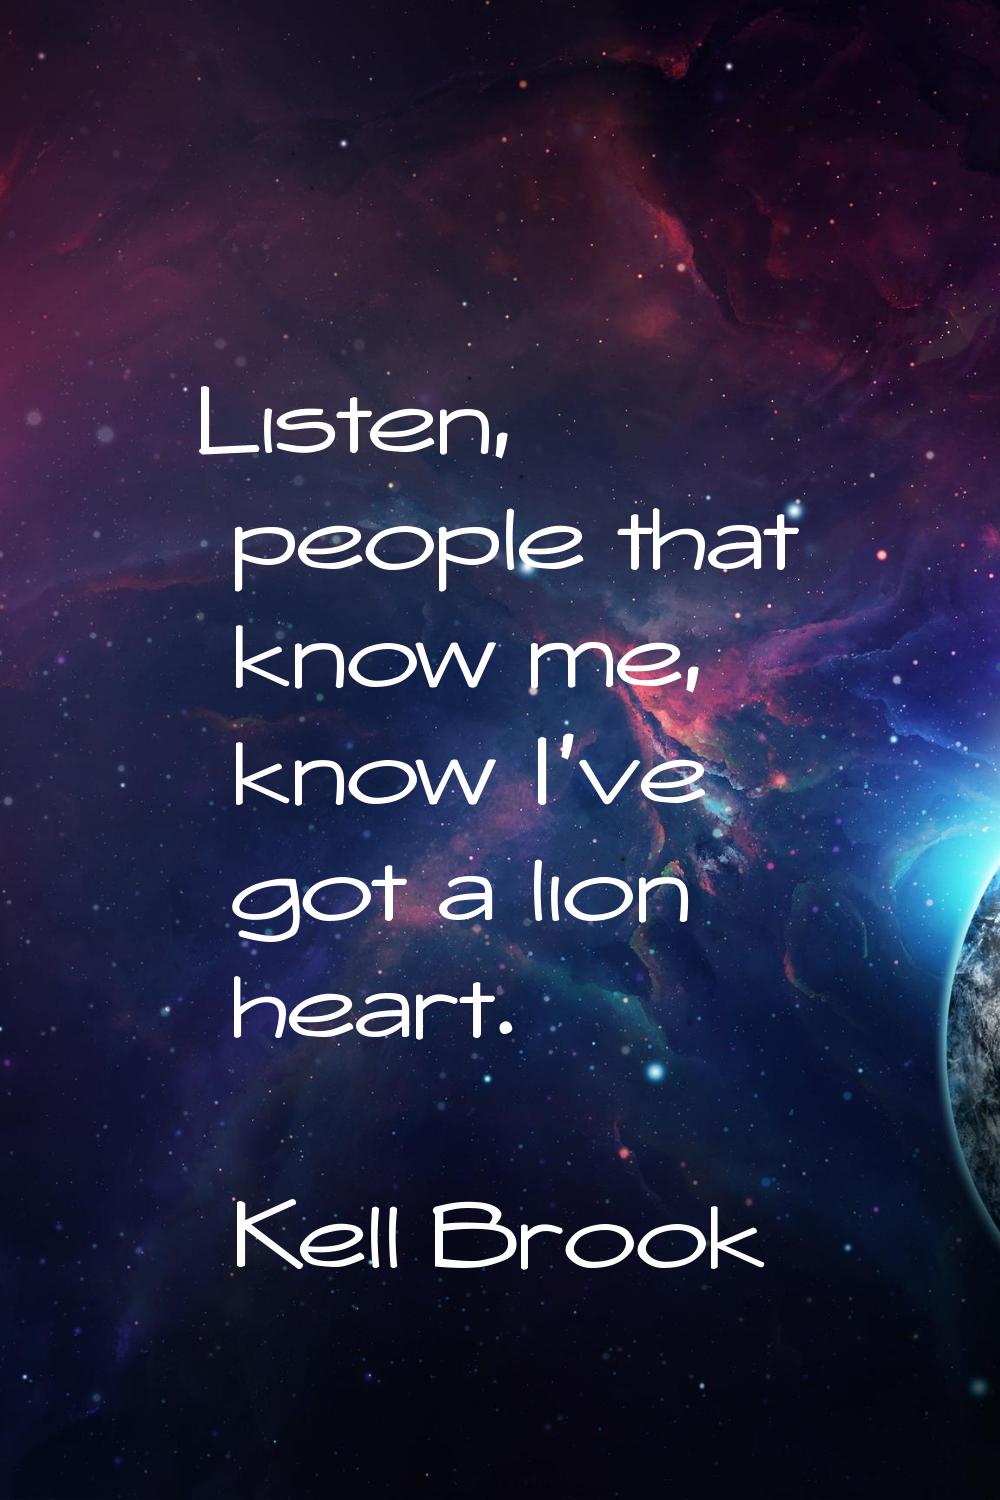 Listen, people that know me, know I've got a lion heart.